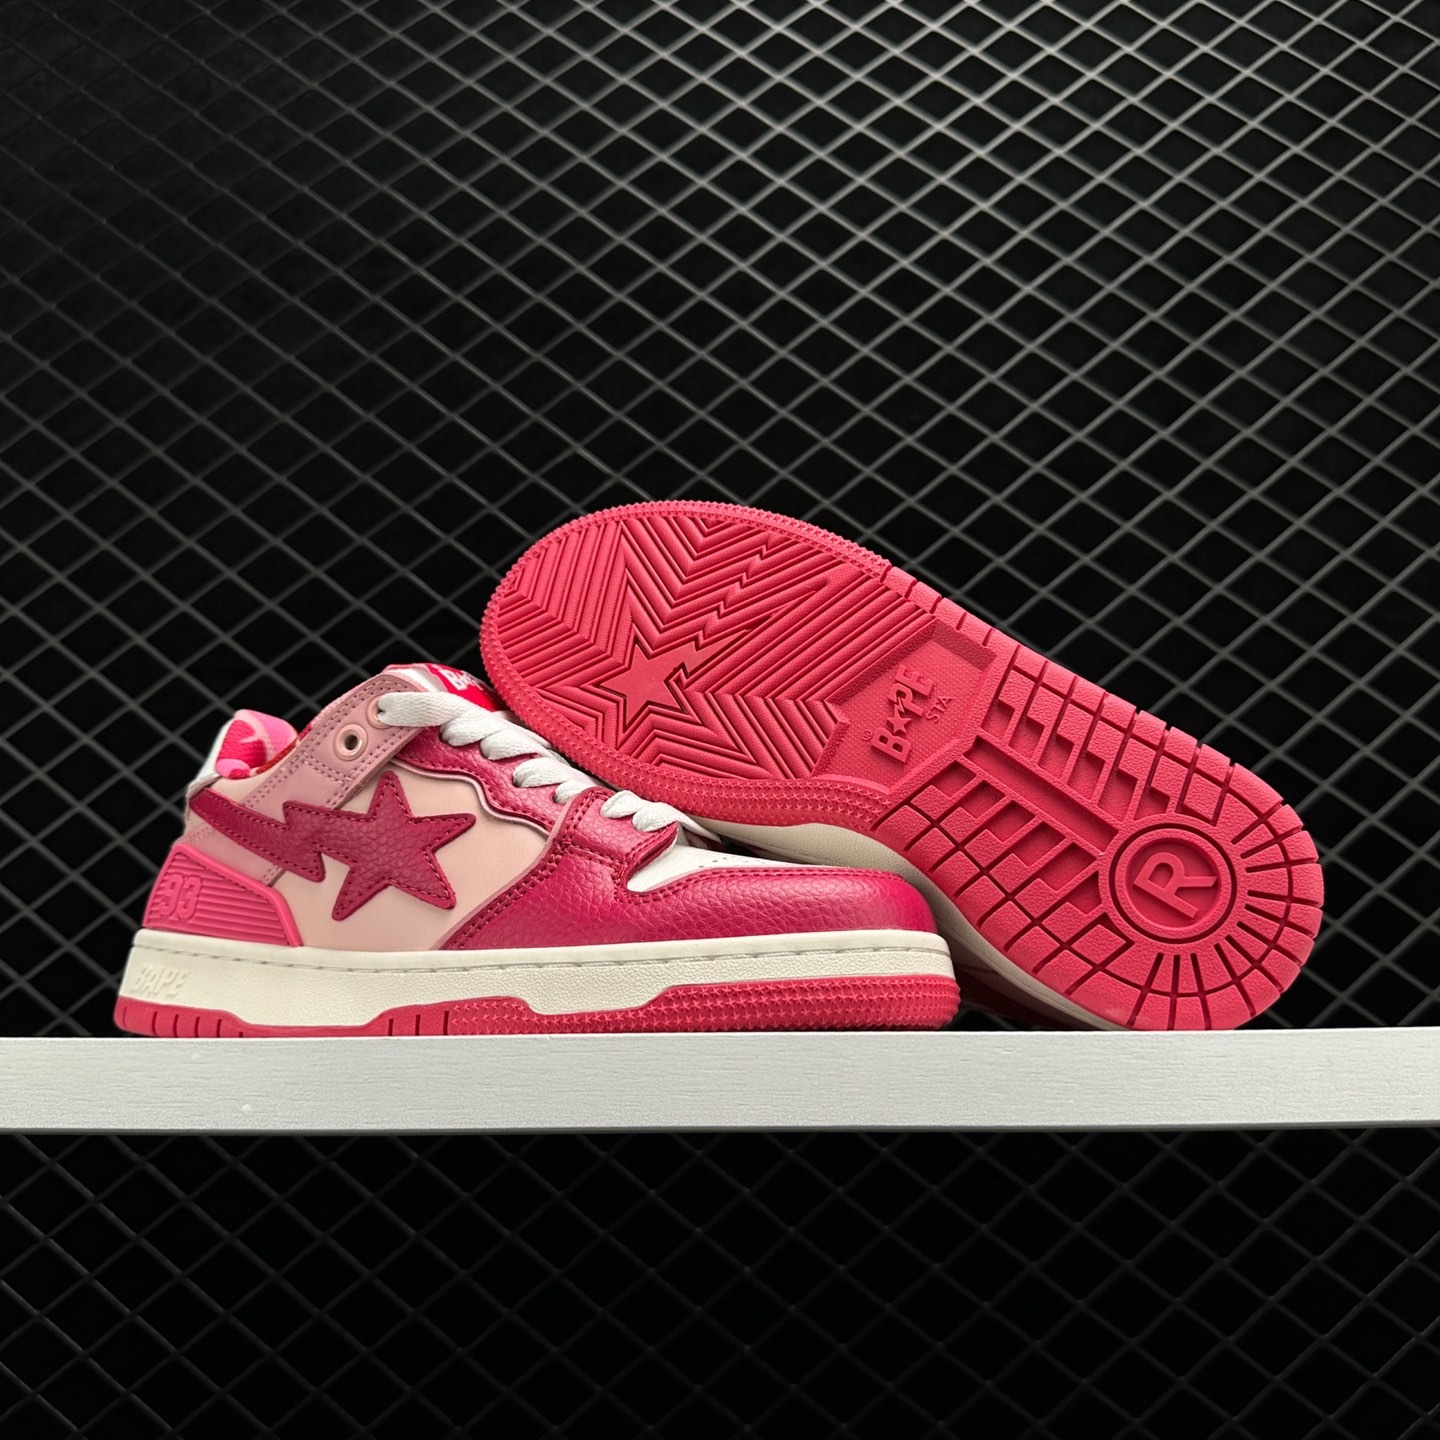 A BATHING APE Bape Sk8 Sta Pink Shoes - Limited Edition Streetwear